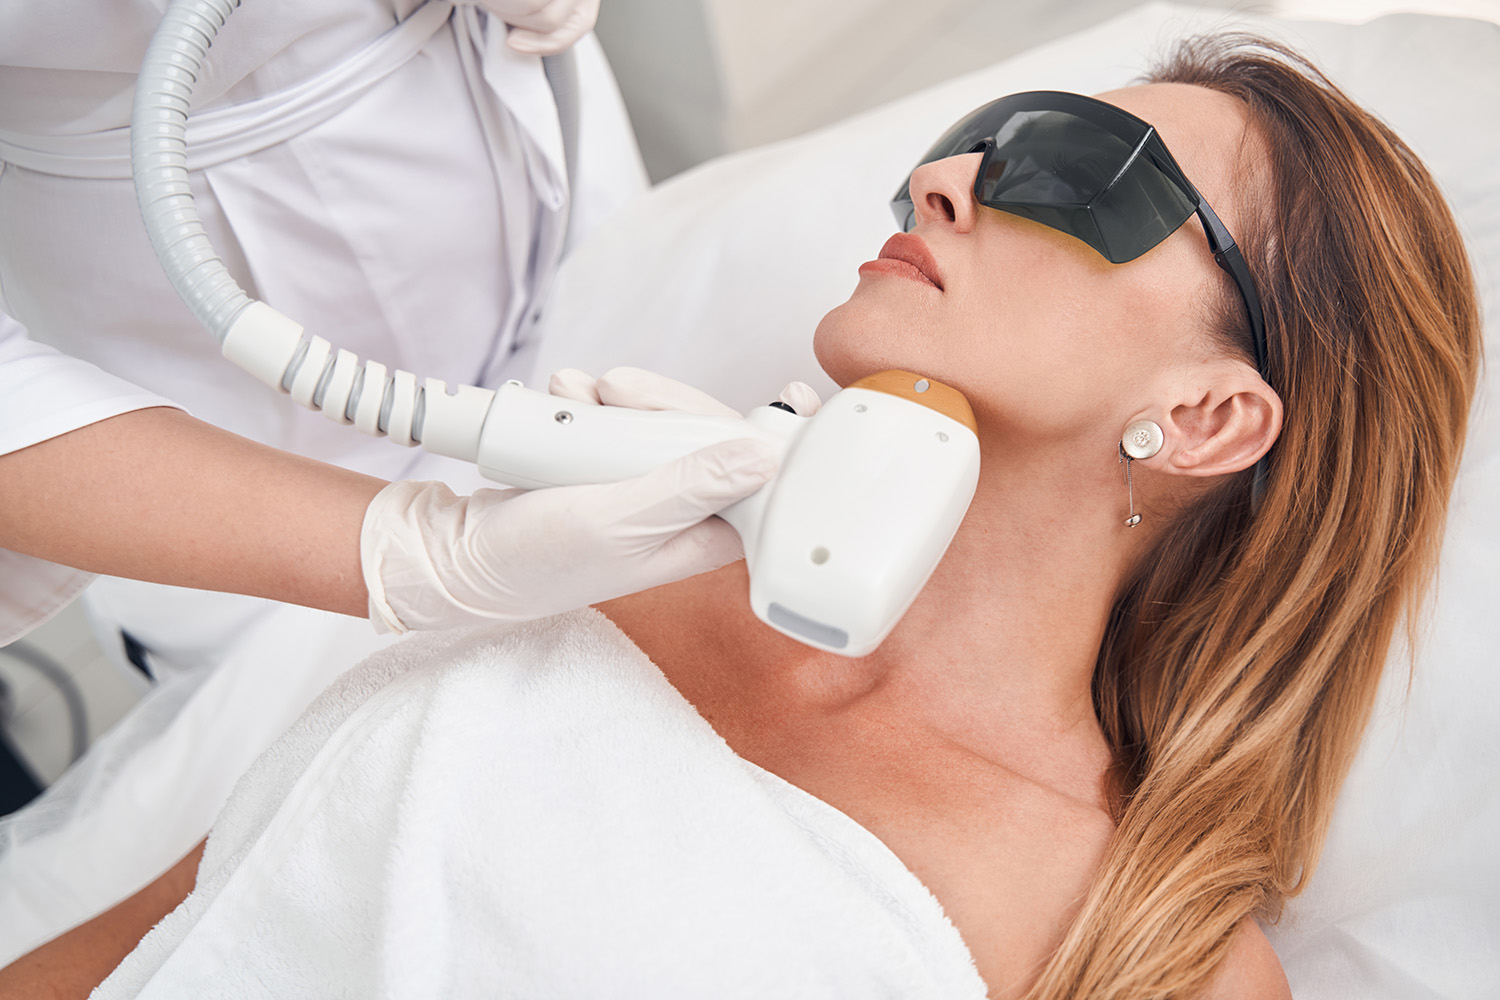 Calm female during laser treatment with professional